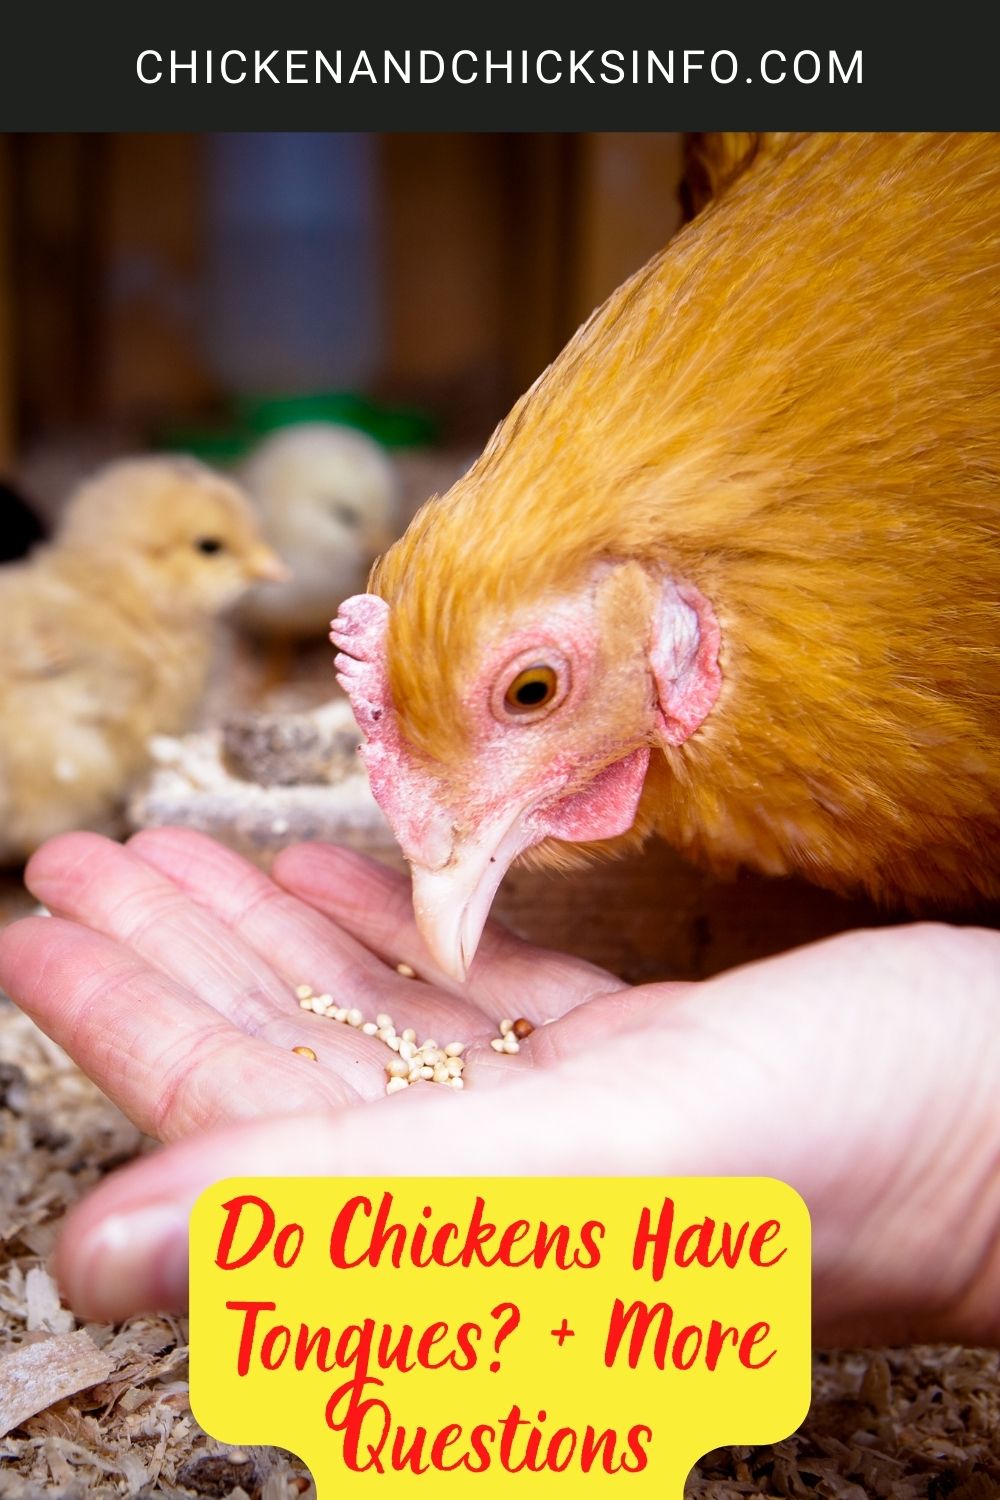 Do Chickens Have Tongues? + More Questions poster.
